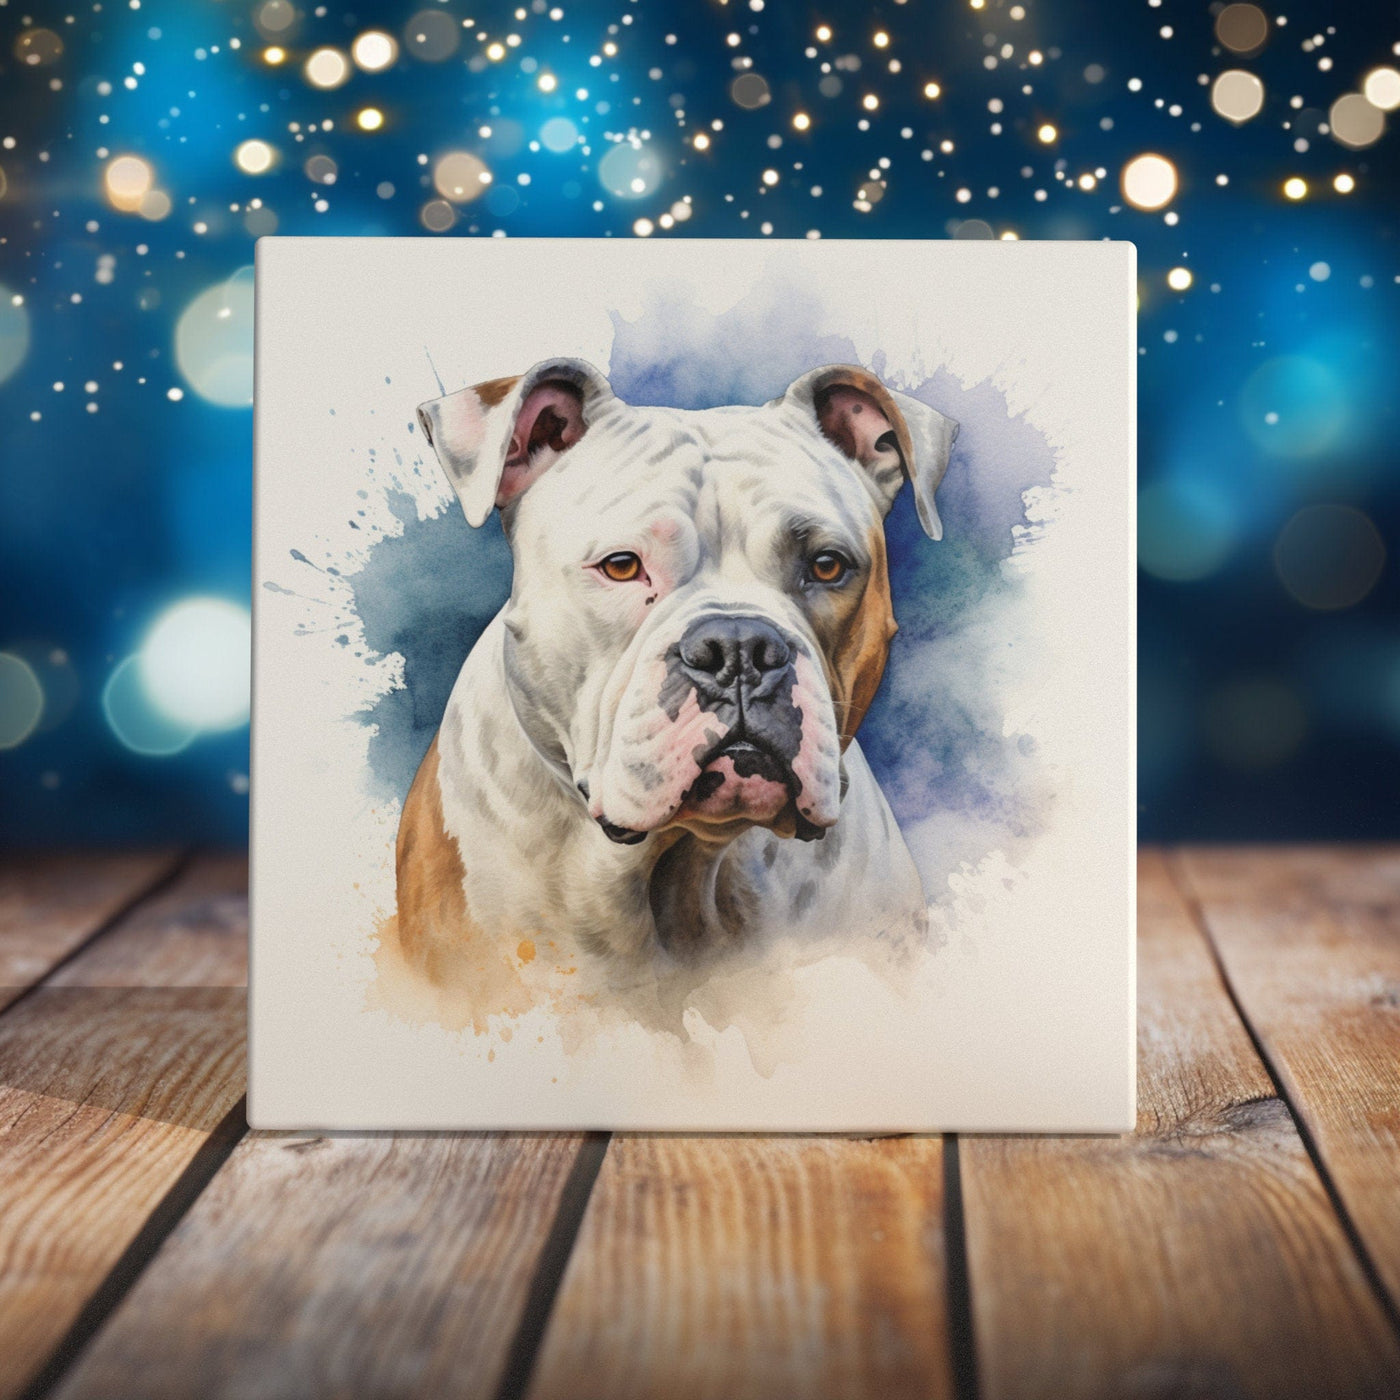 Peeping Tom's Cottage Custom Printed Tile Soulful American Bulldog Art Tile - Hand-Painted Watercolor Decorative Piece for Home and Office